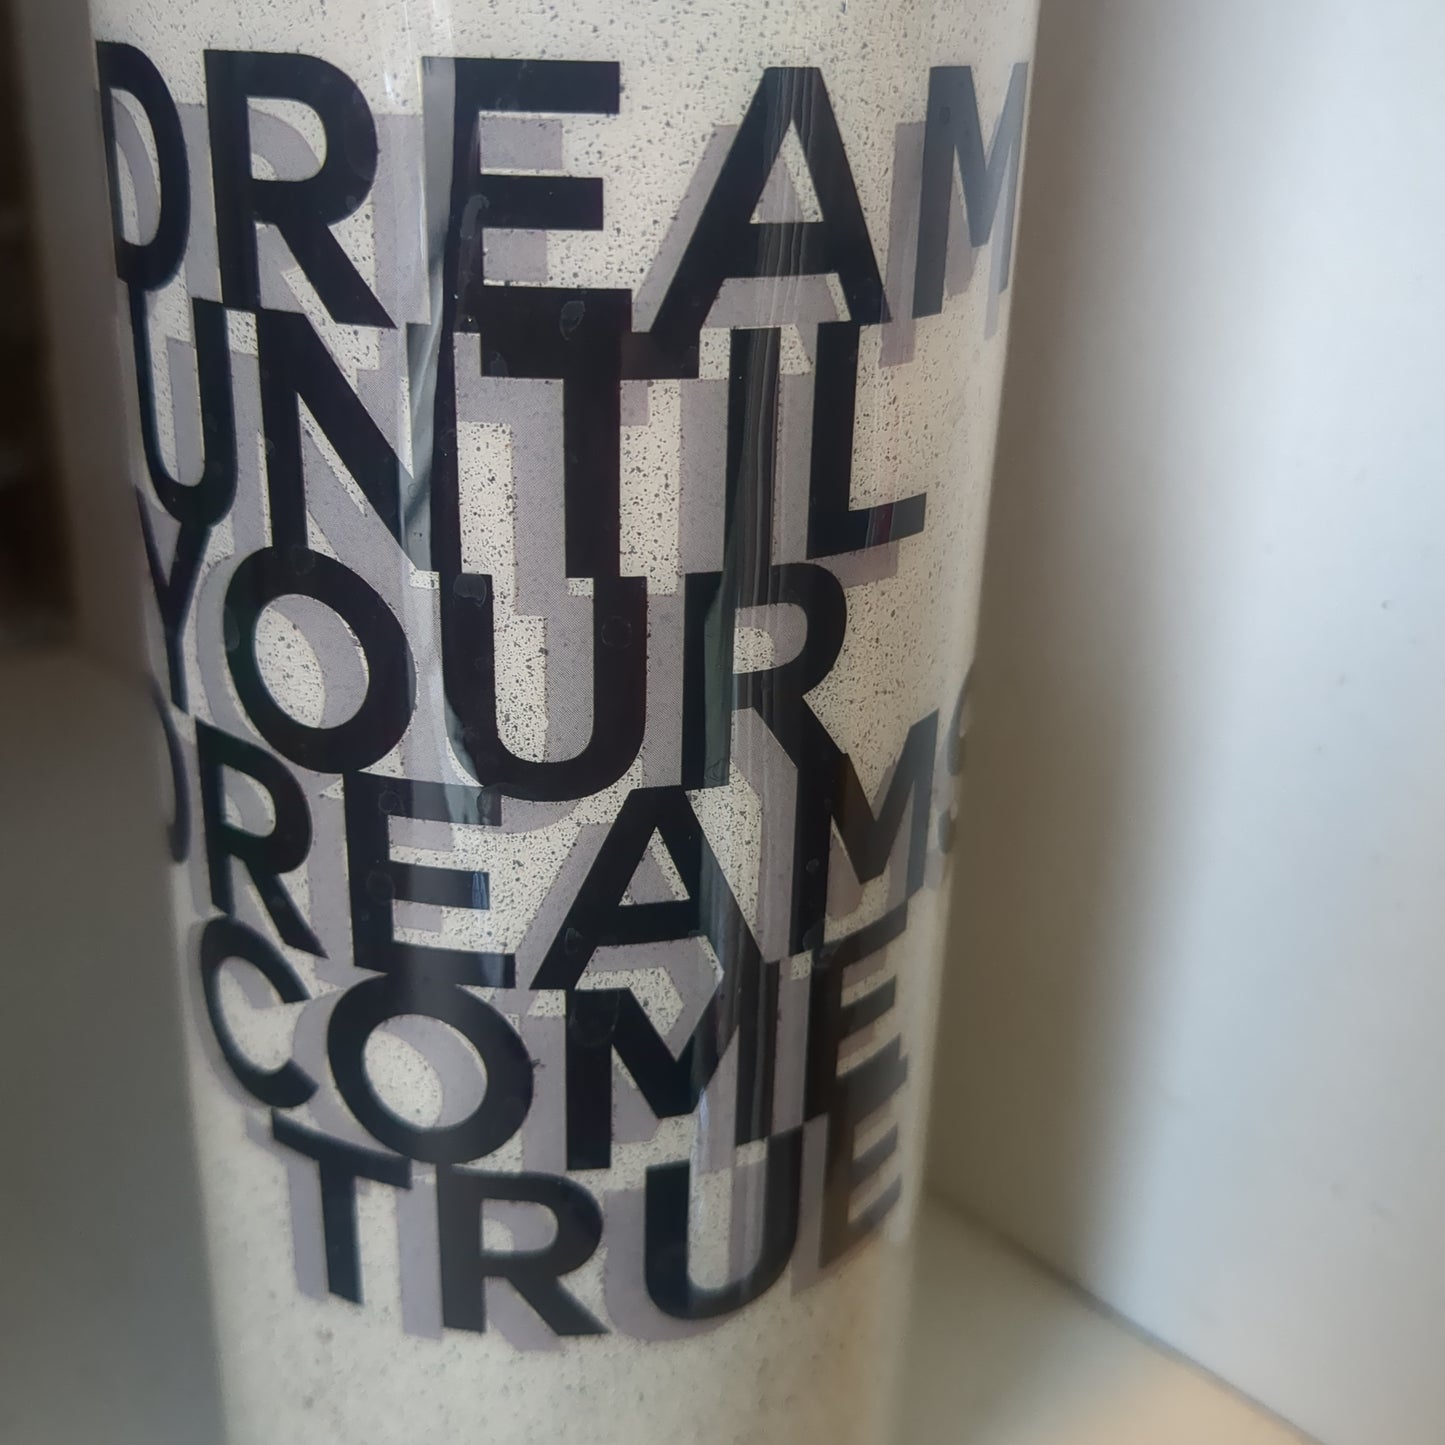 20 oz Stainless steel Tumbler Dream Until All Your Dreams Come True